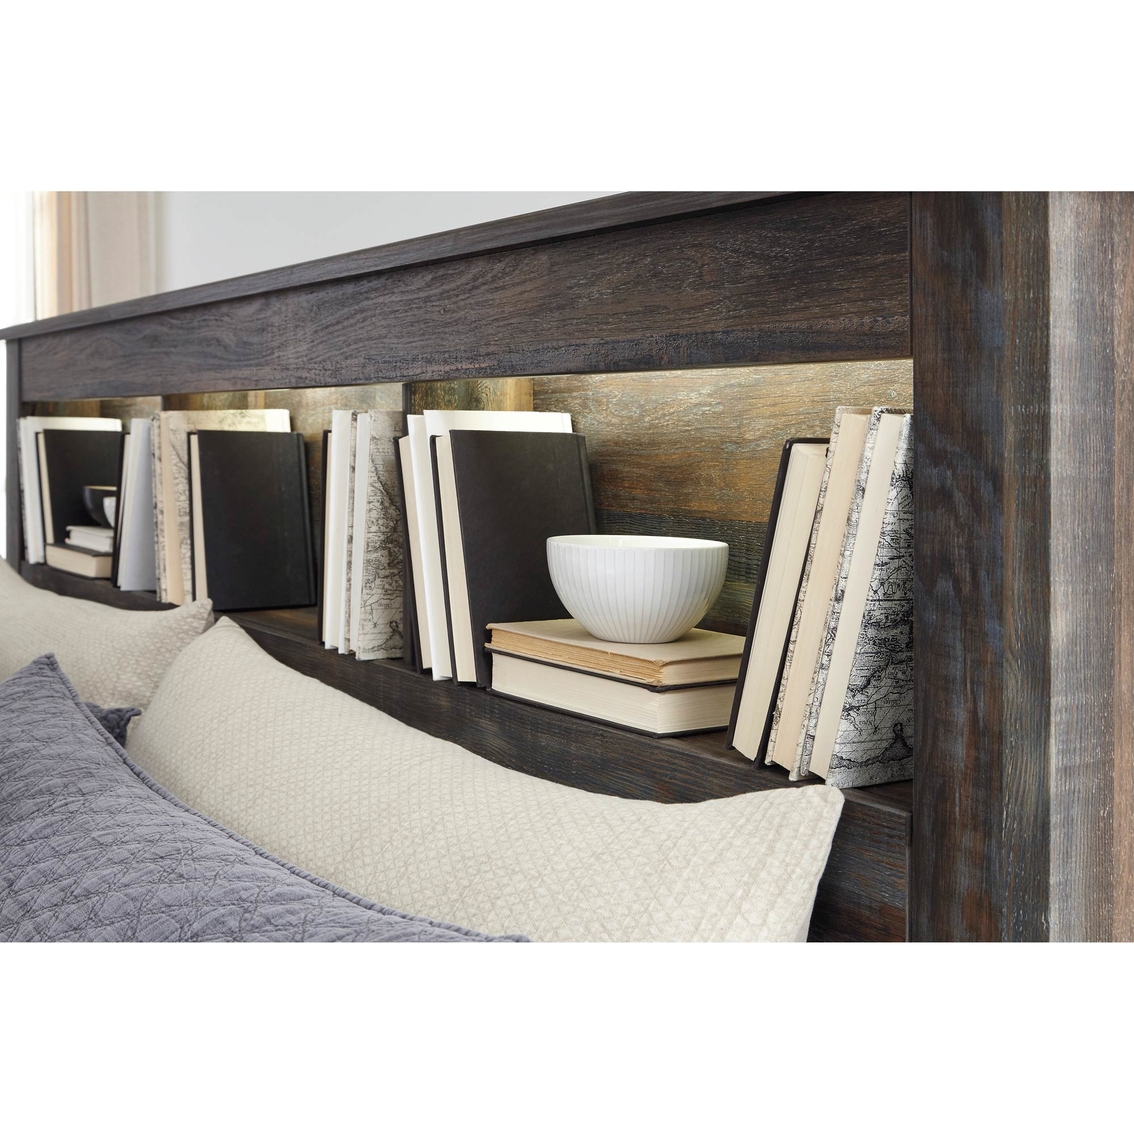 Signature Design by Ashley Drystan Bookcase Headboard Bed - Image 3 of 4